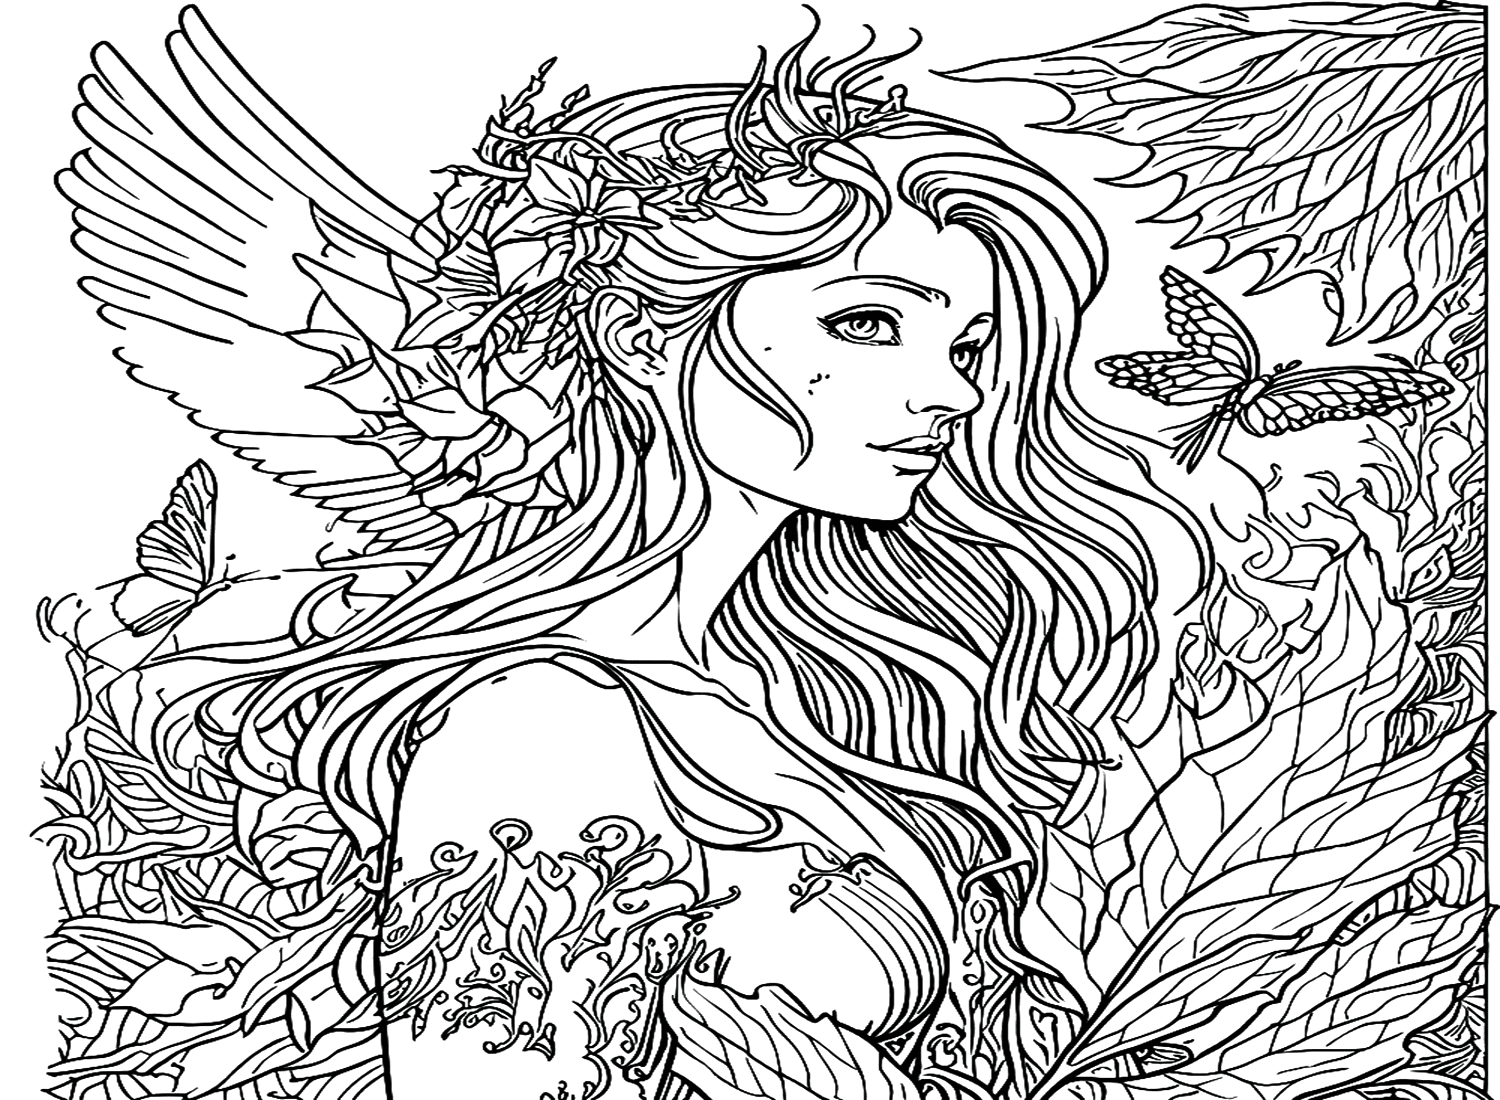 Fairy Coloring Pages For Adults from Fairy